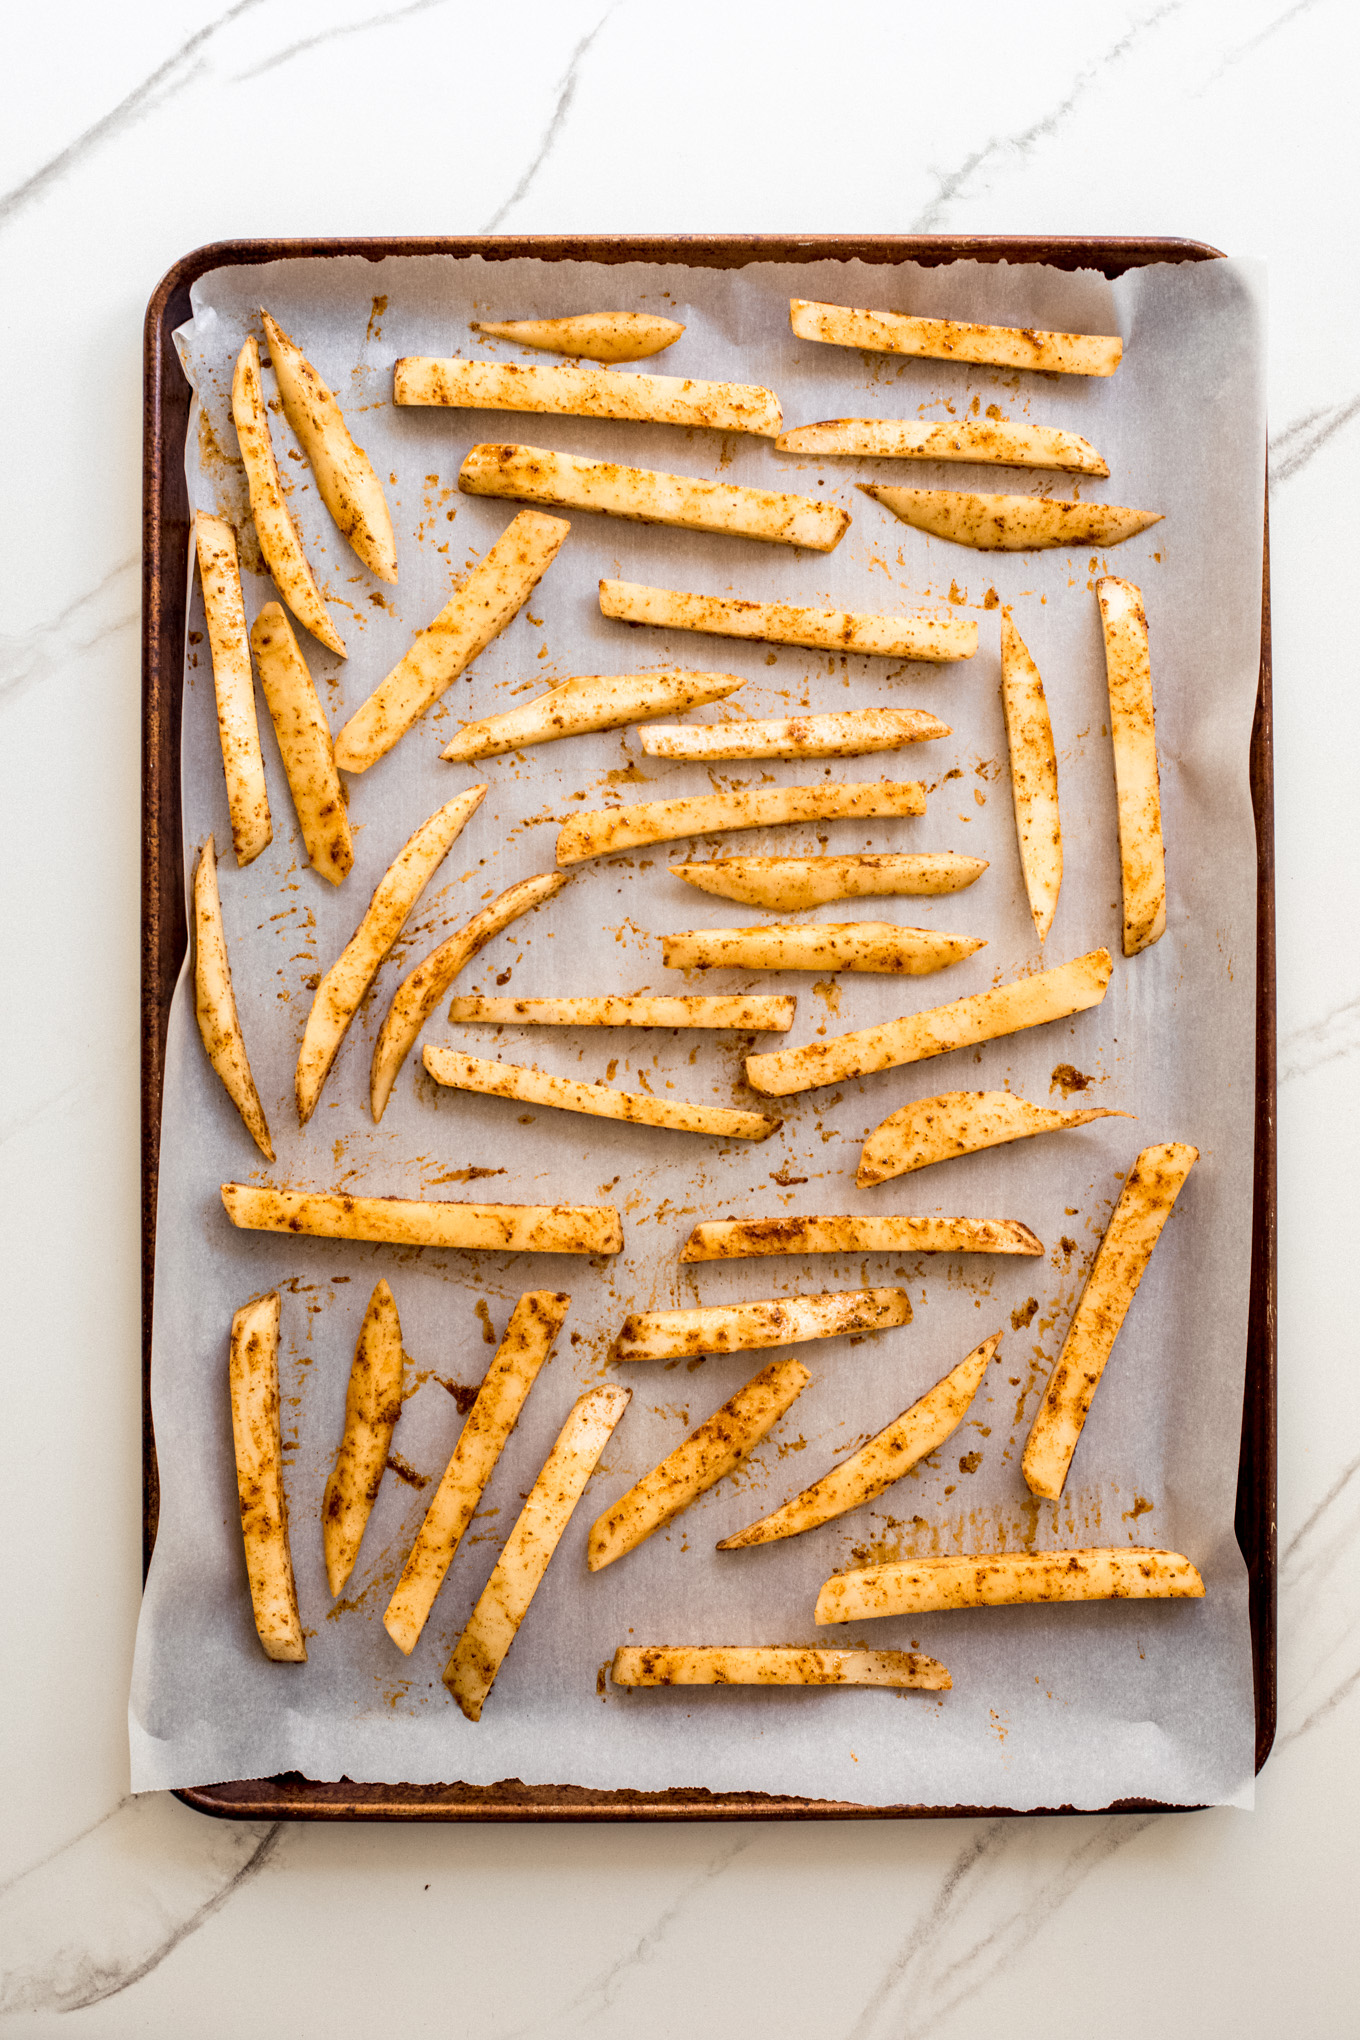 french fries on a baking sheet lined with parchment paper.